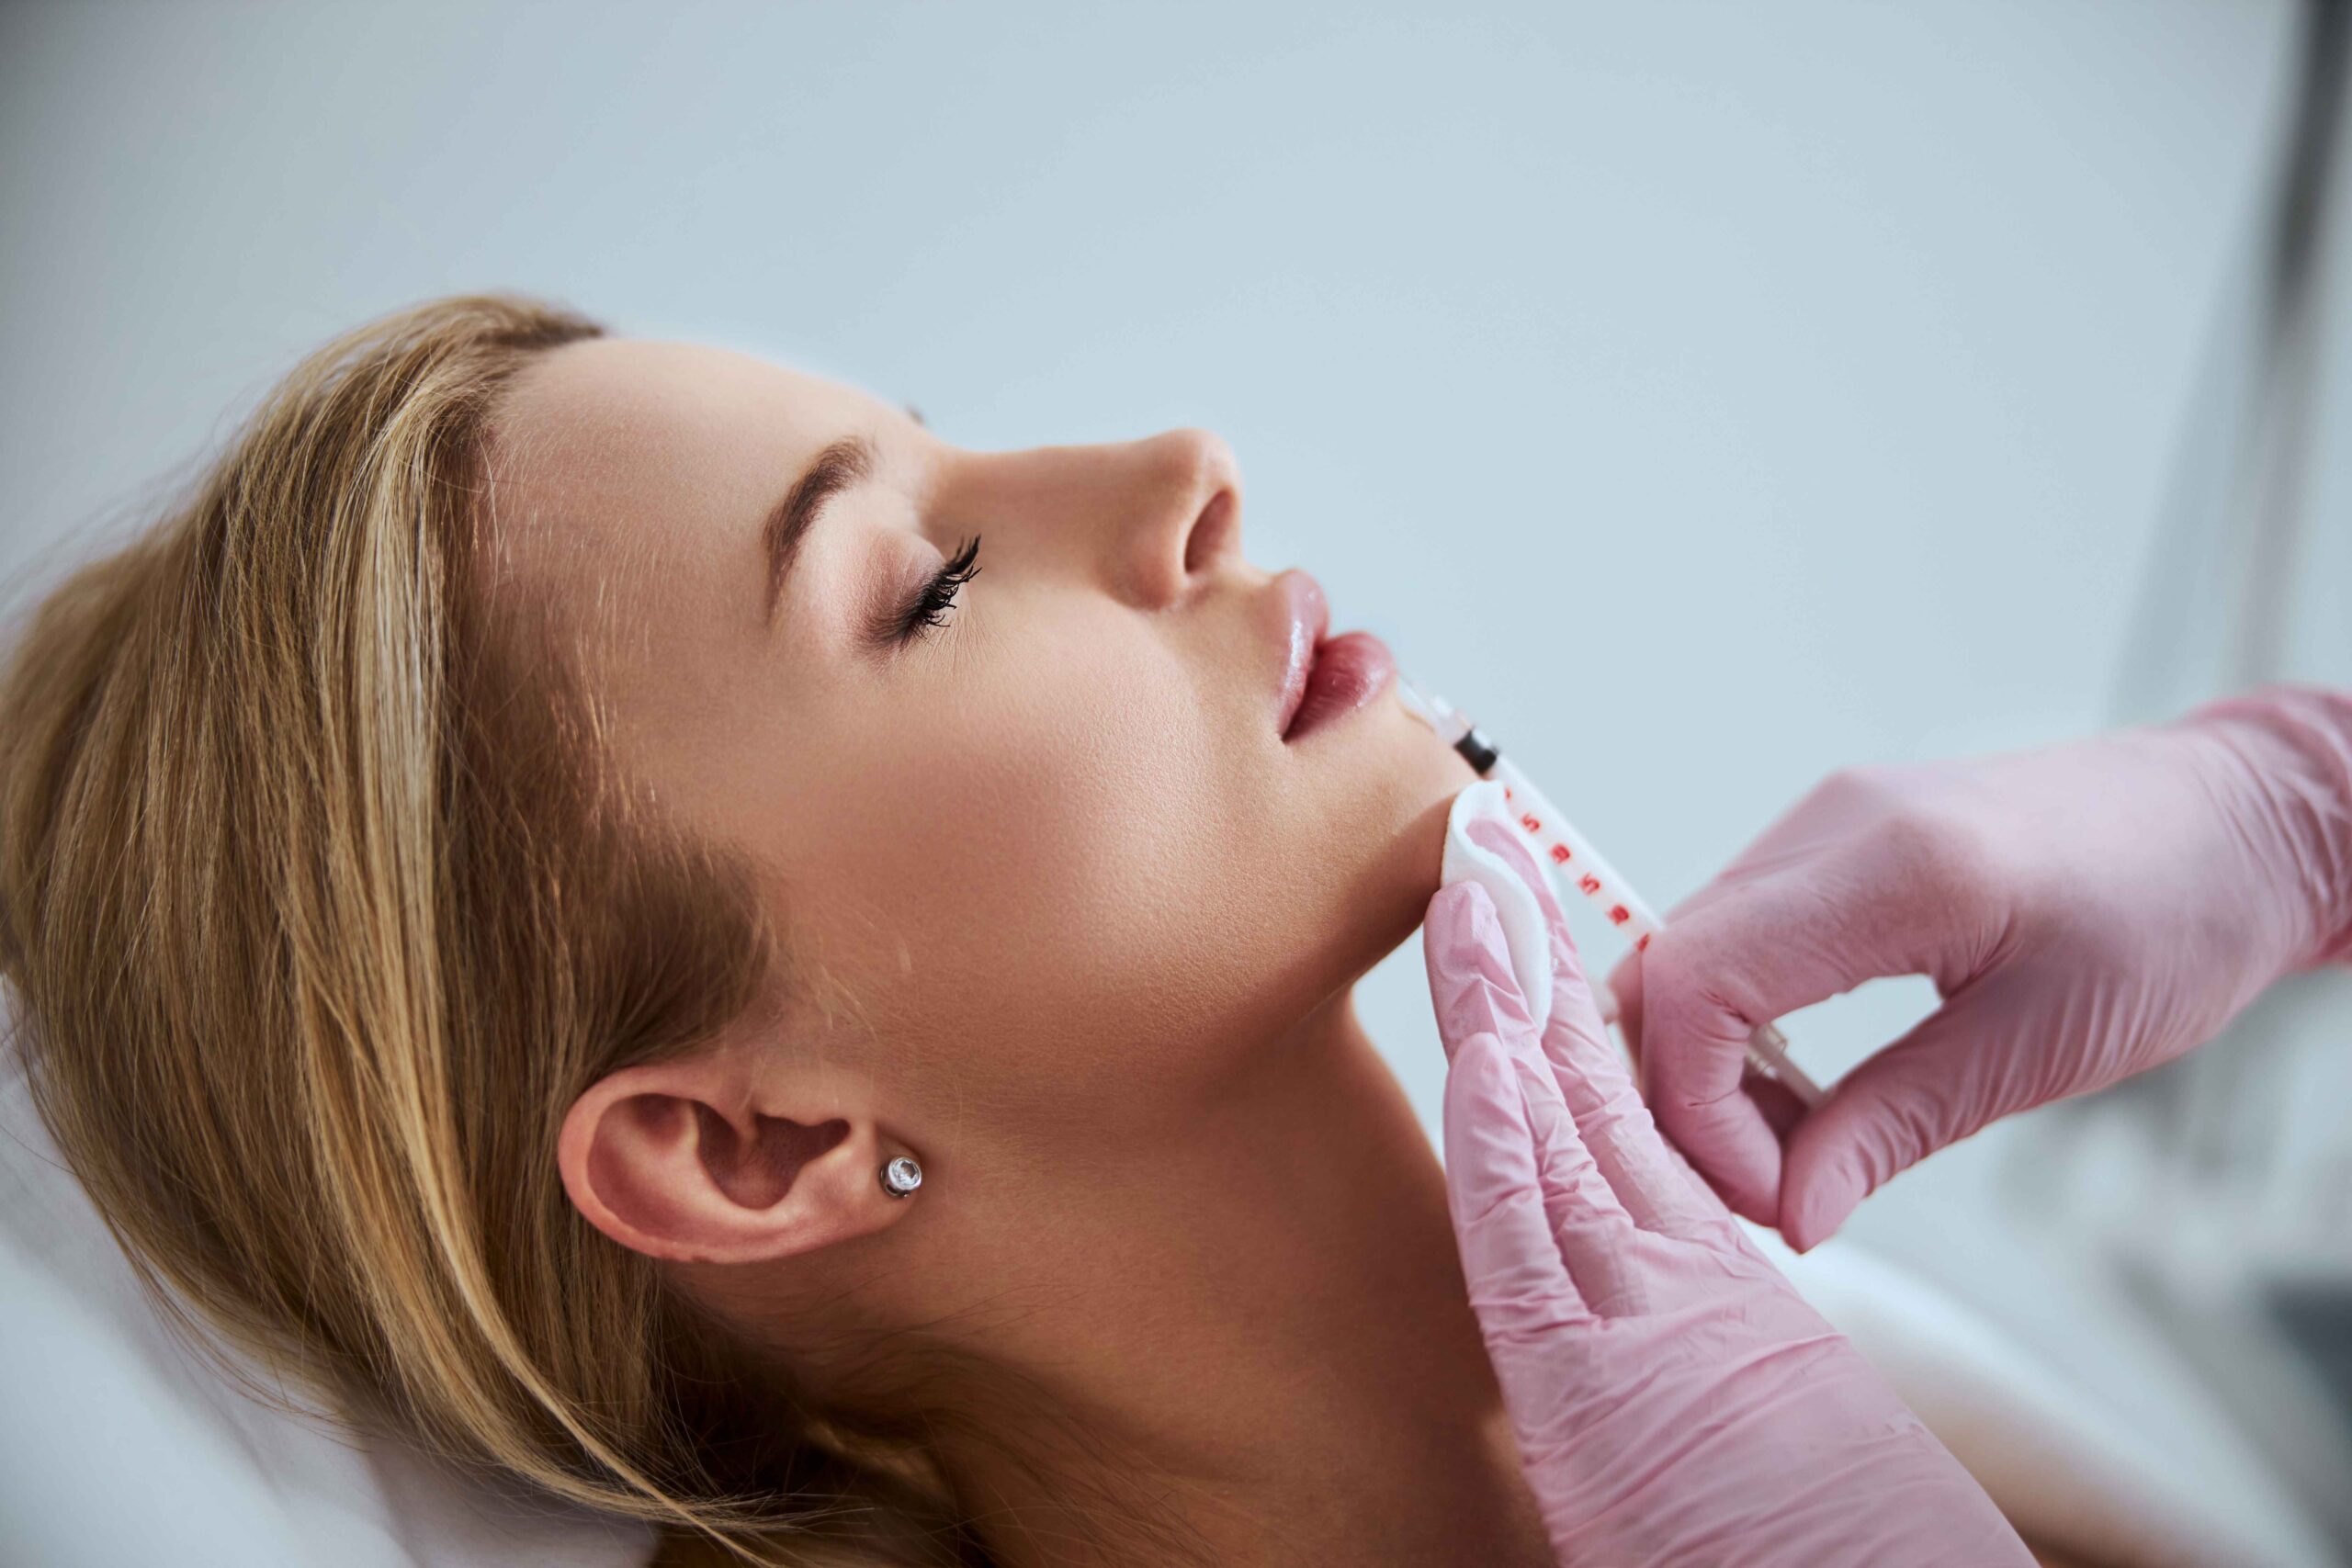 Image of a woman before dermal filler treatment